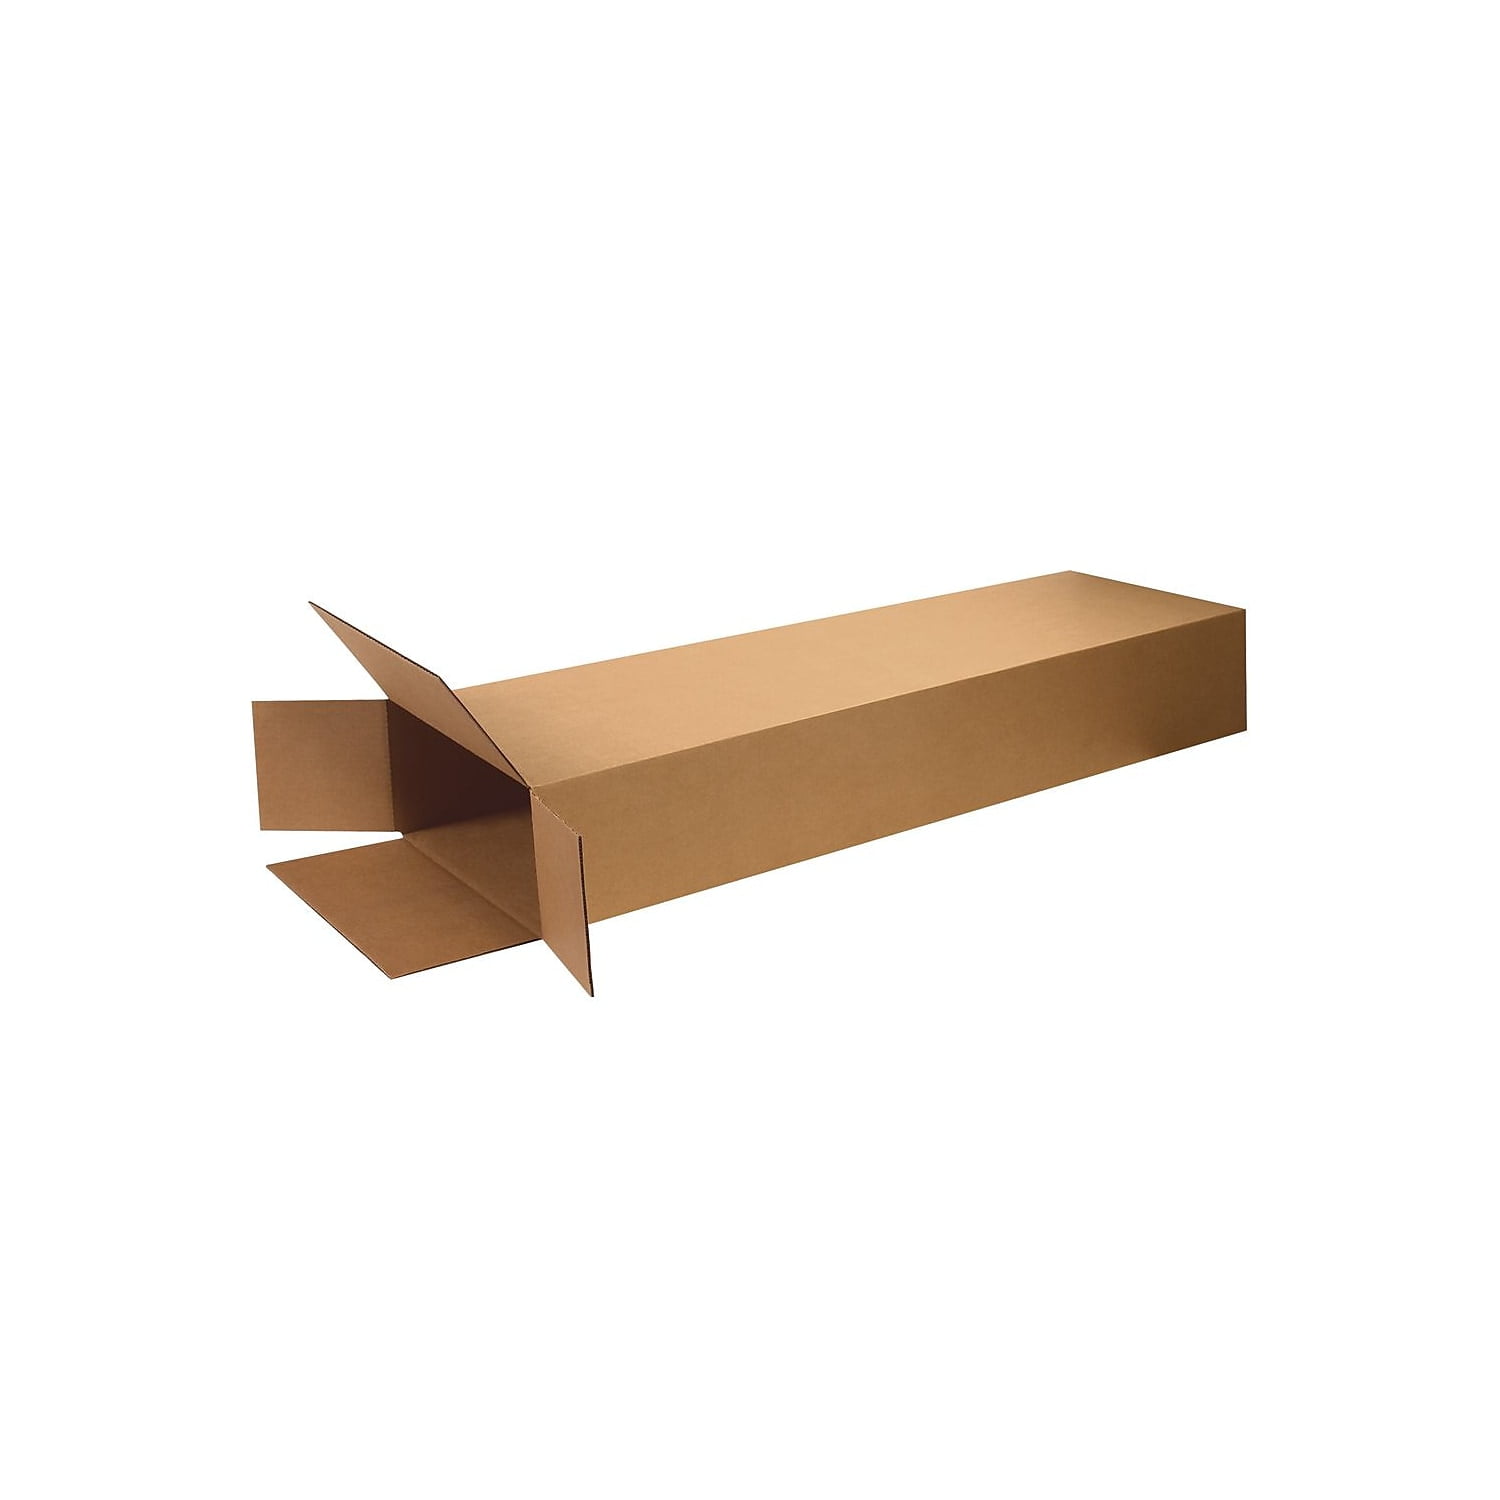 500x380x280 H Carton › Packaging Products